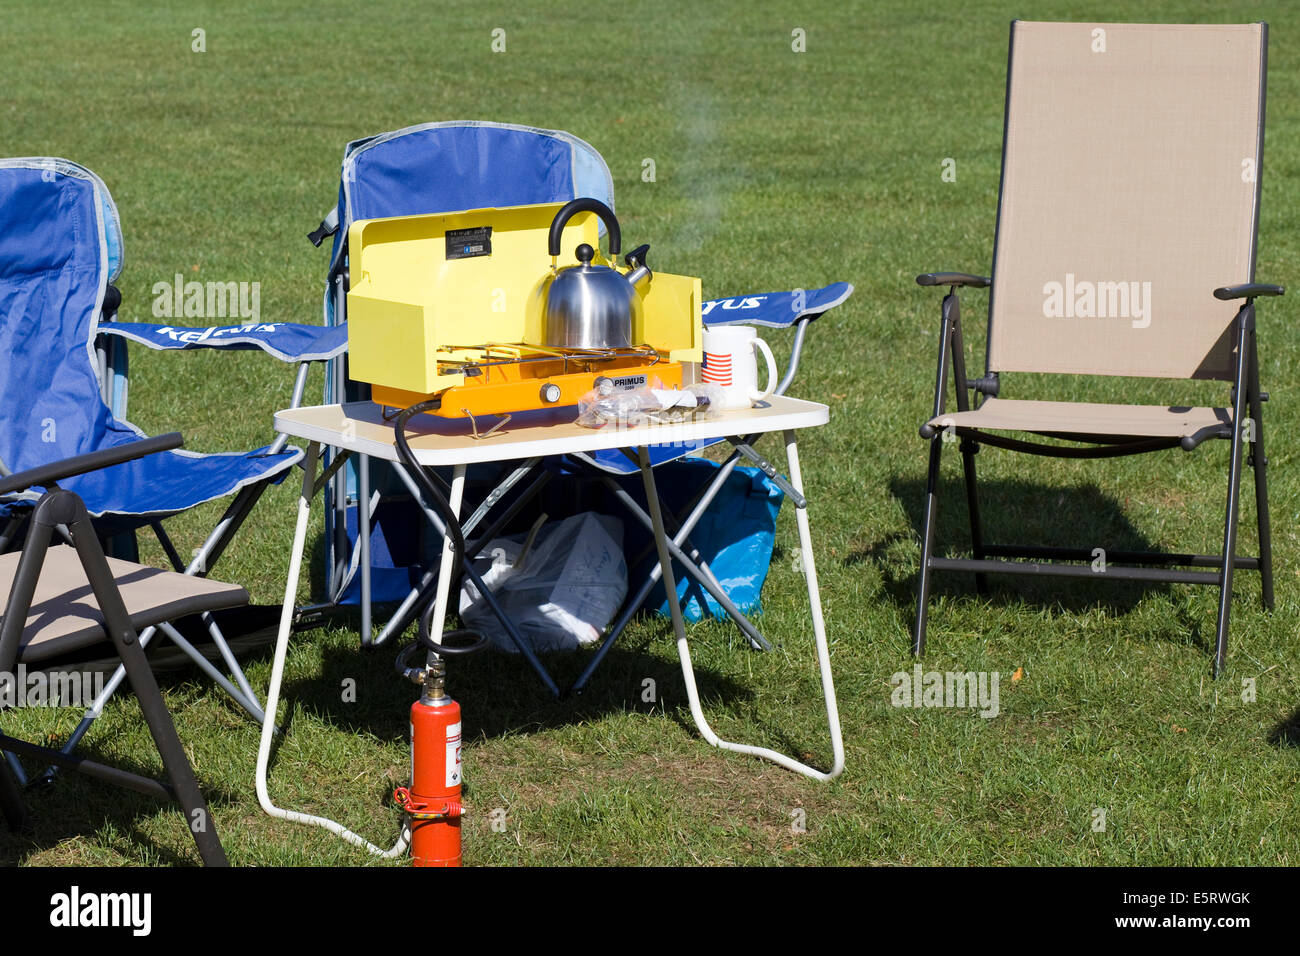 Picnic table and chairs with a portable stove and steaming kettle Stock Photo